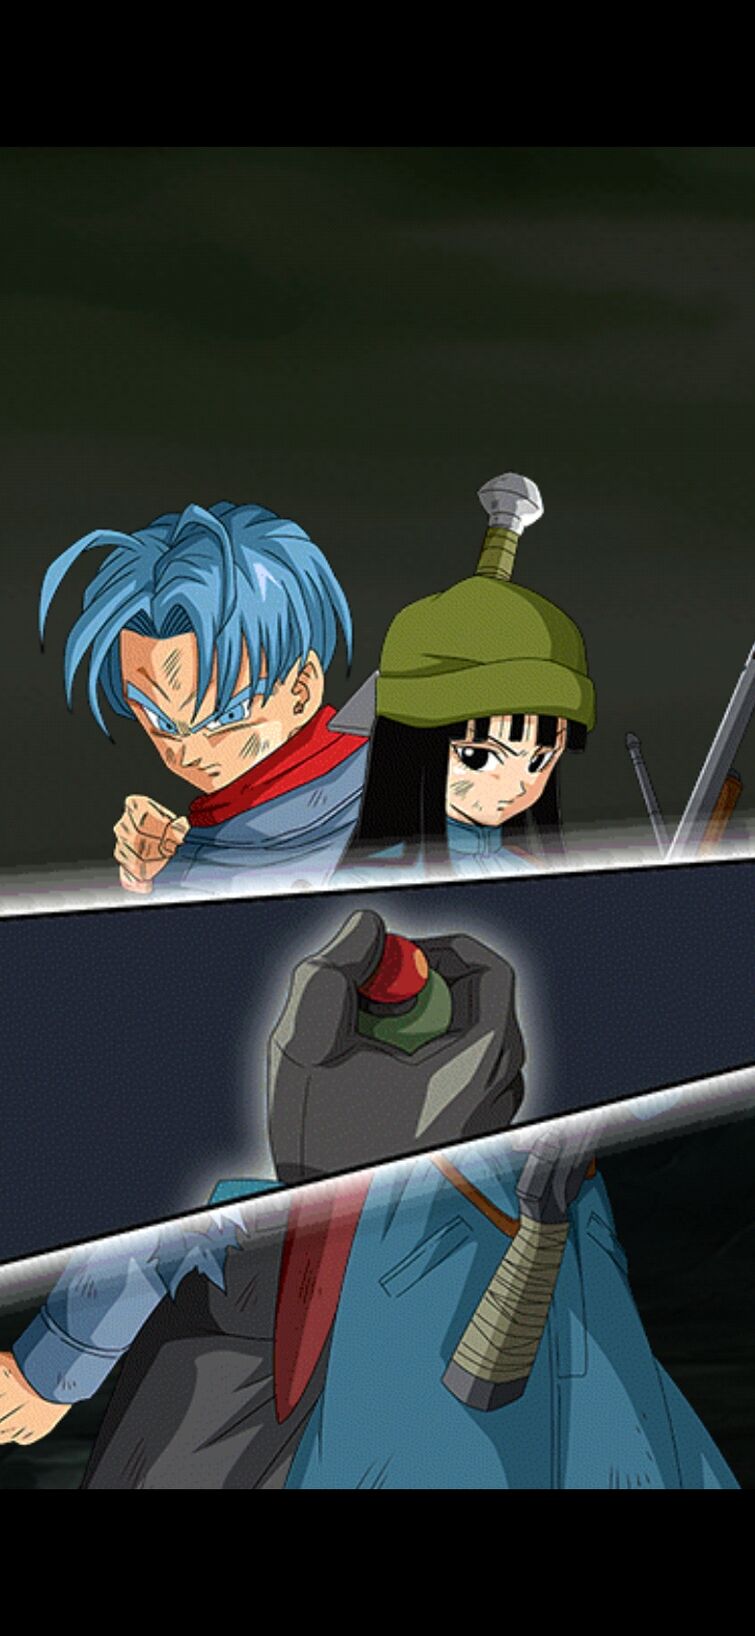 does anyone have this frame for lr str trunks and mai super attack